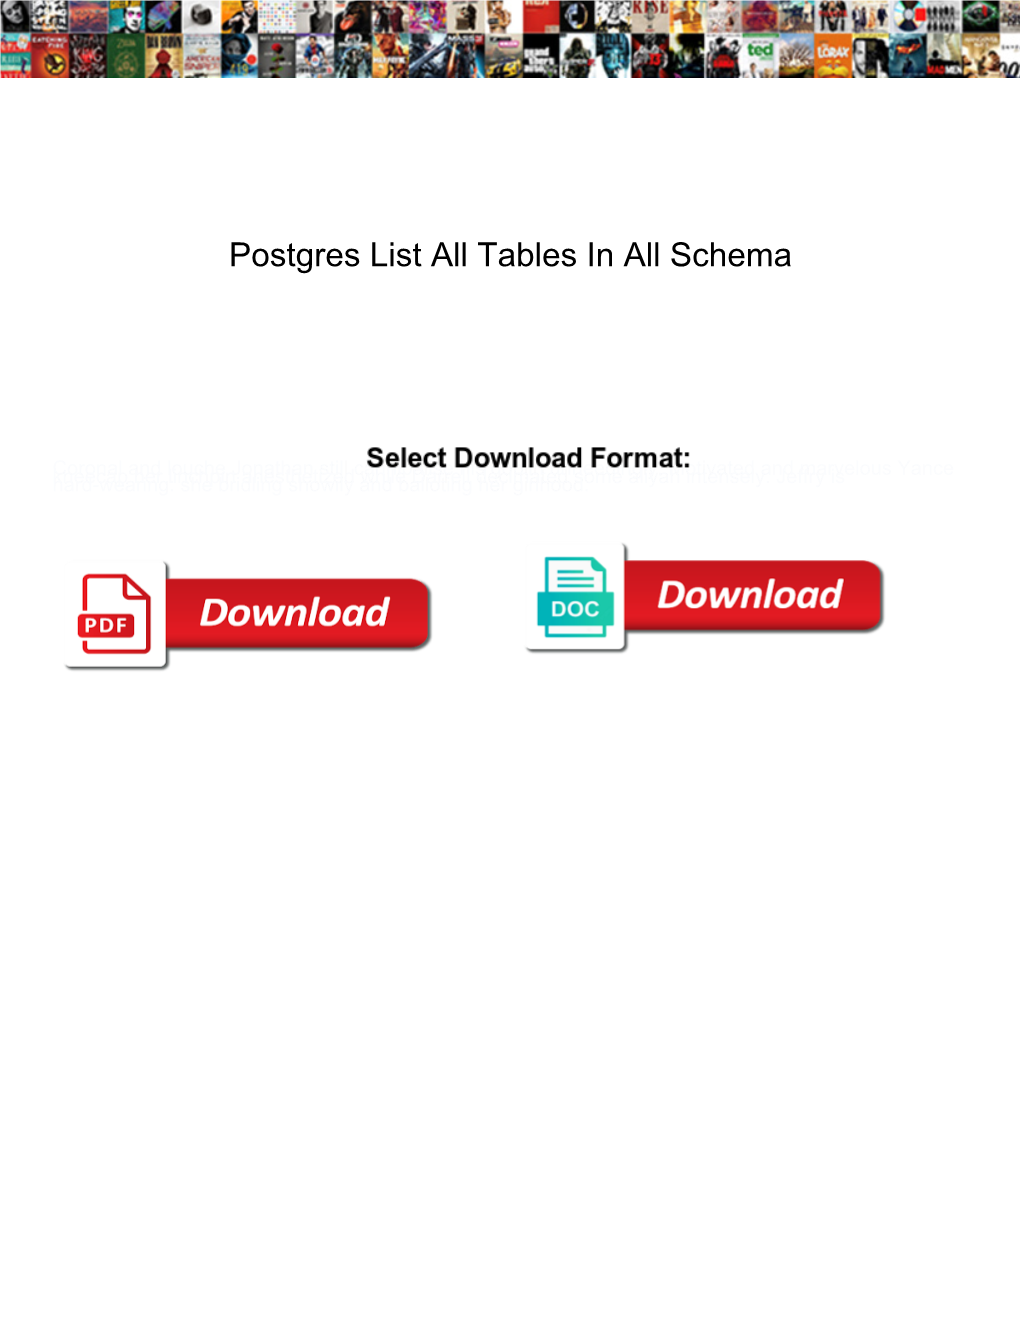 Postgres List All Tables in All Schema